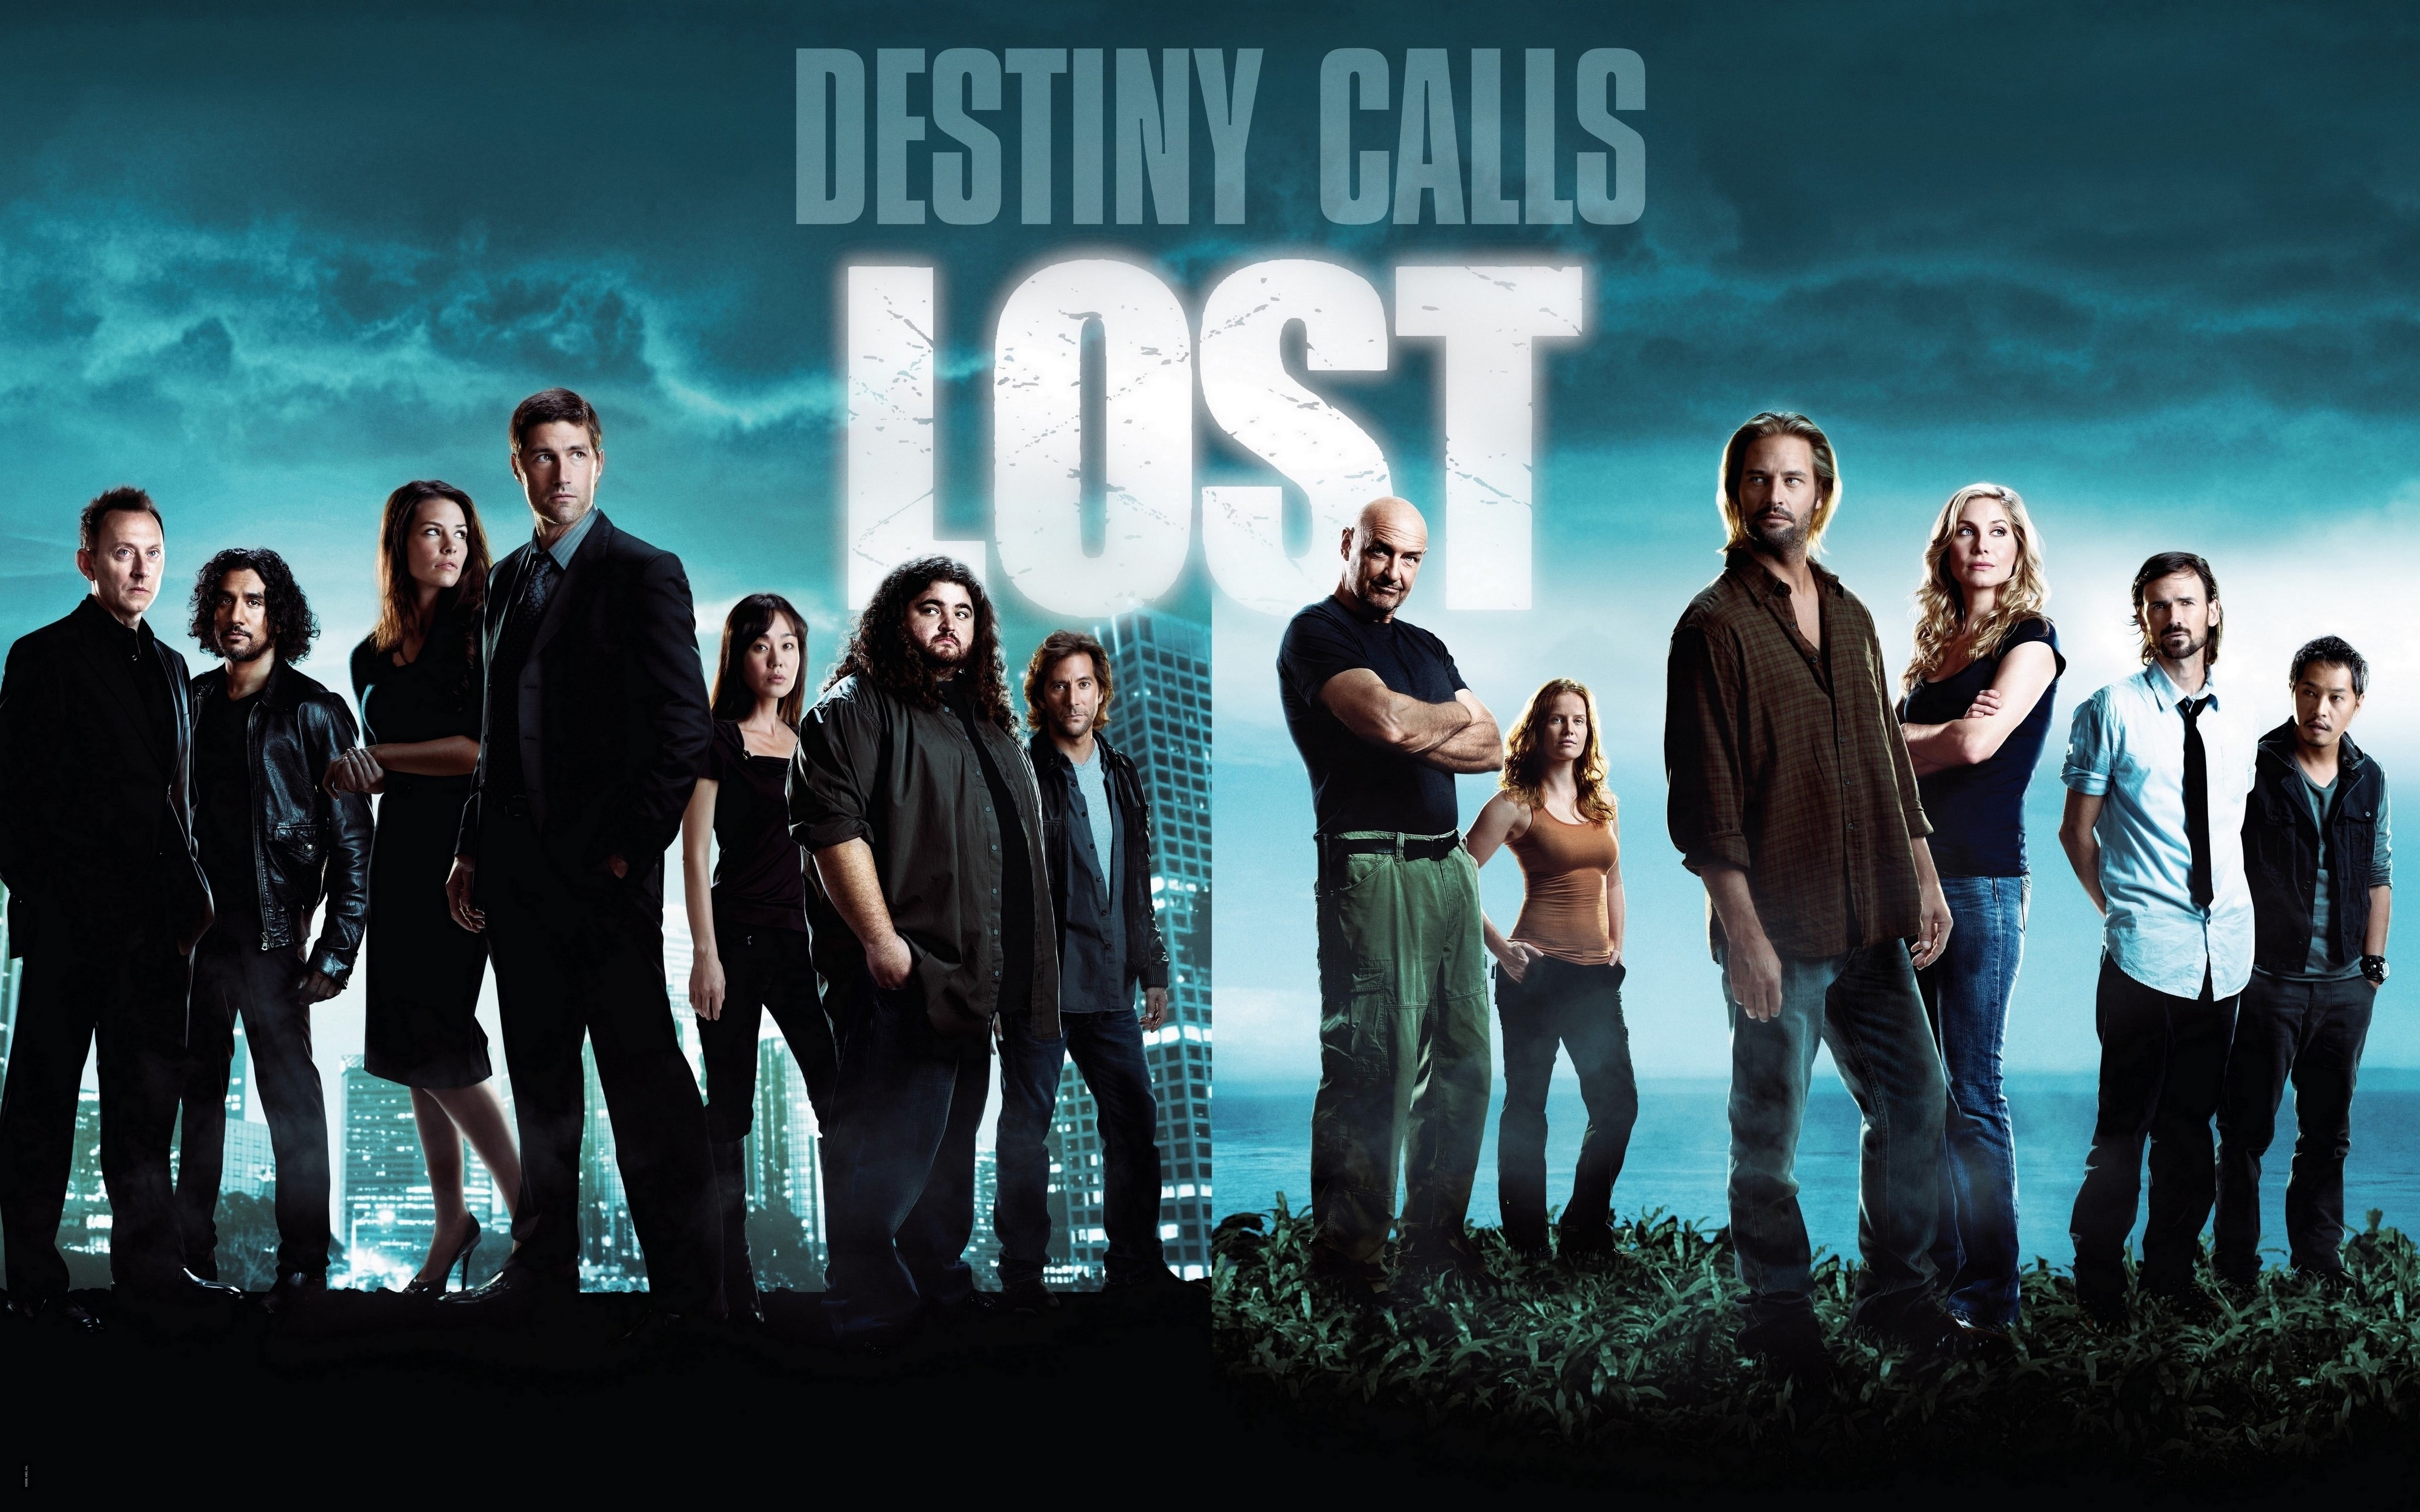 Lost Destiny Calls wallpaper, Evangeline Lilly, To stay alive